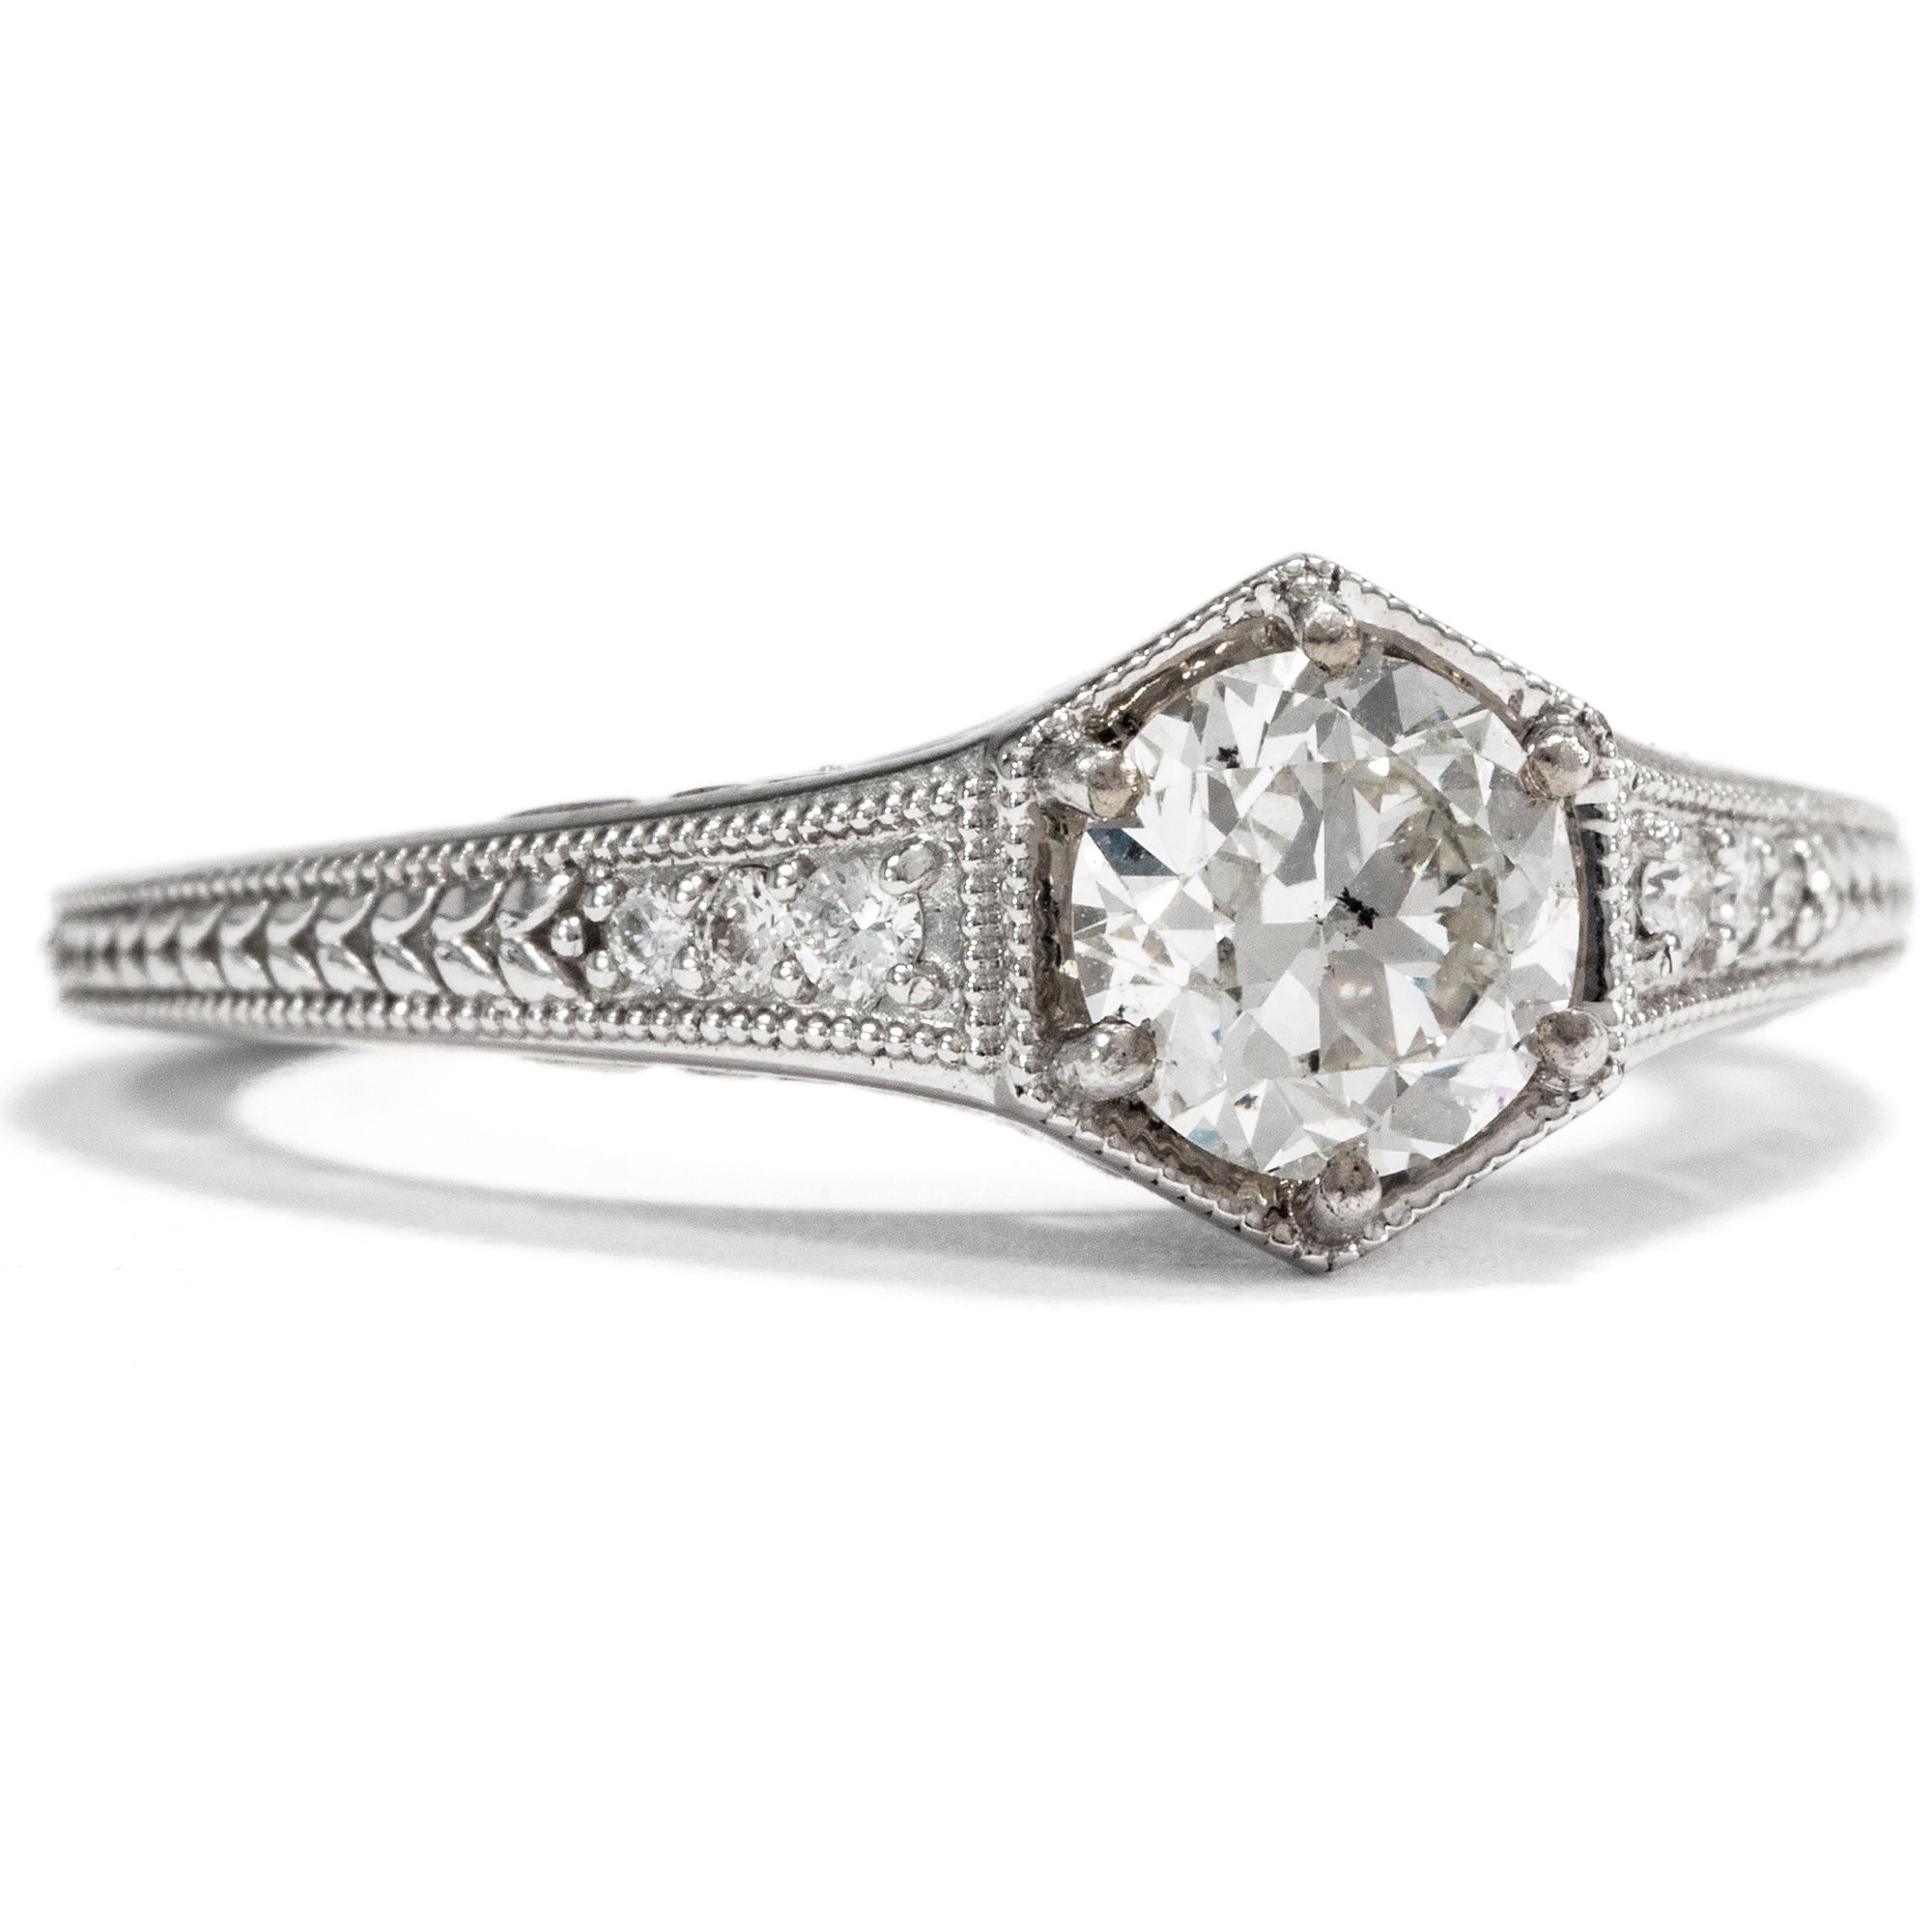 Modern white gold ring with antique 0.84 ct European Old Cut solitaire, around 1900/2020